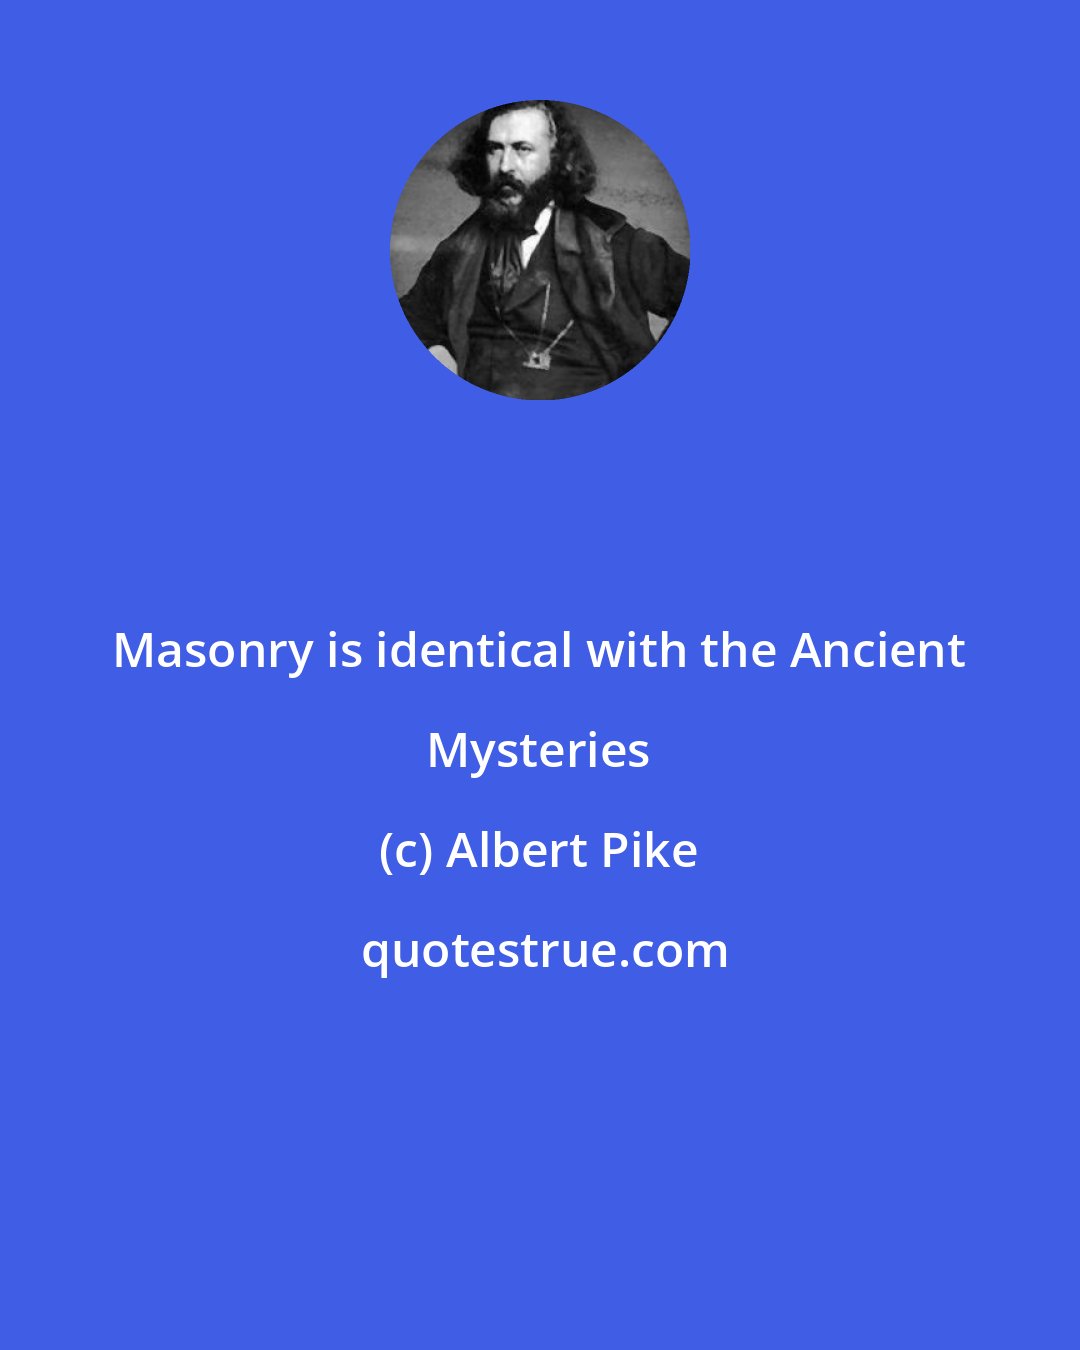 Albert Pike: Masonry is identical with the Ancient Mysteries